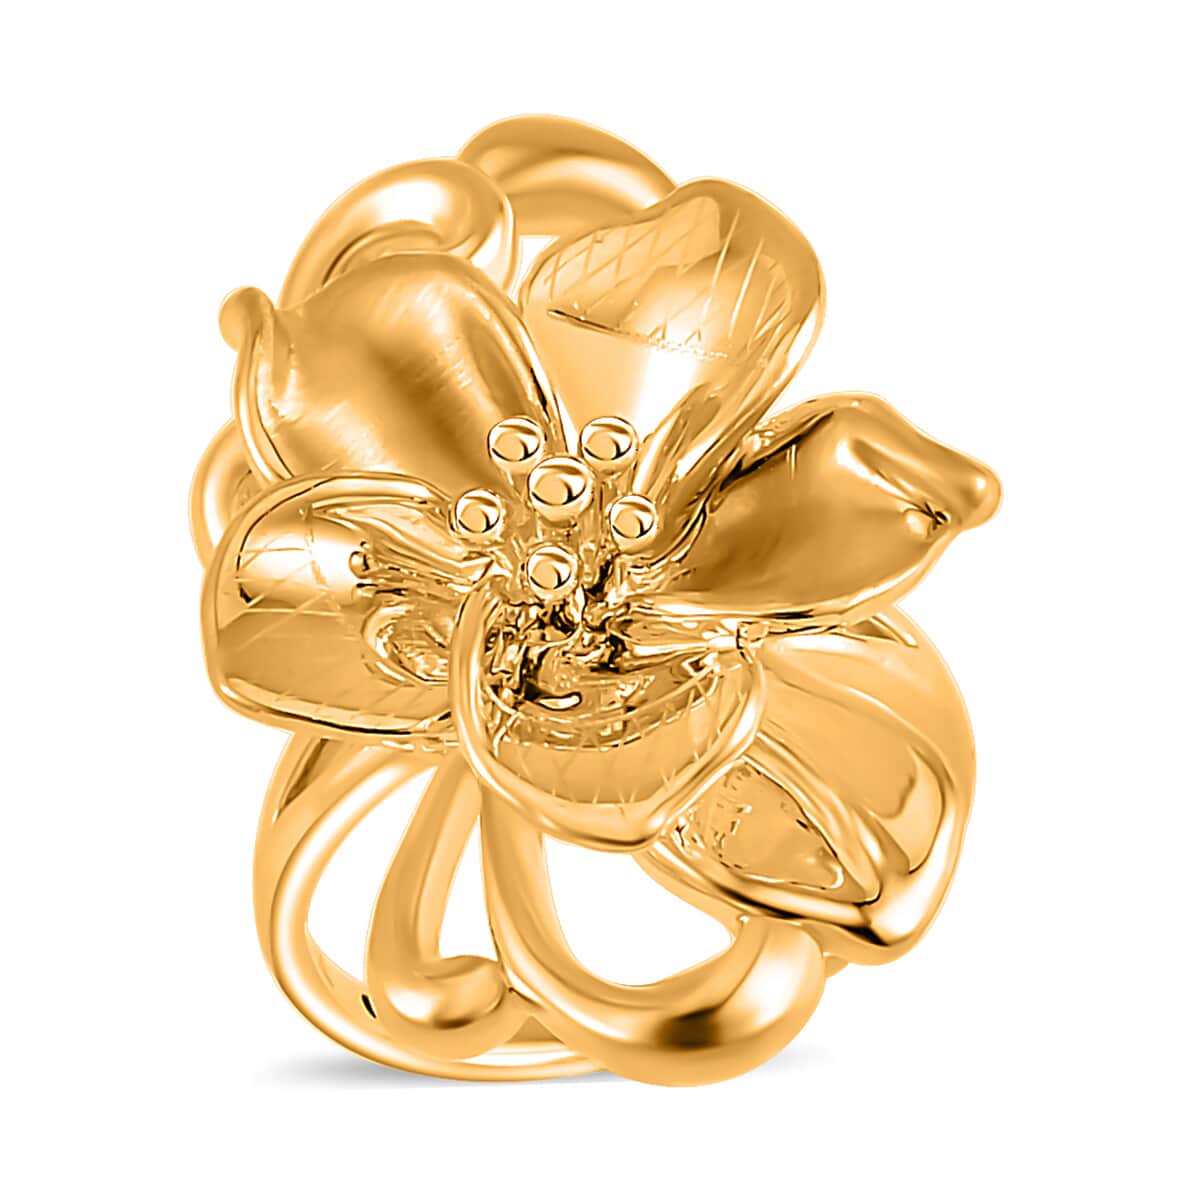 24K Yellow Gold Electroform Peony Floral Ring 2.75 Grams (Del. in 10-12 Days) image number 0